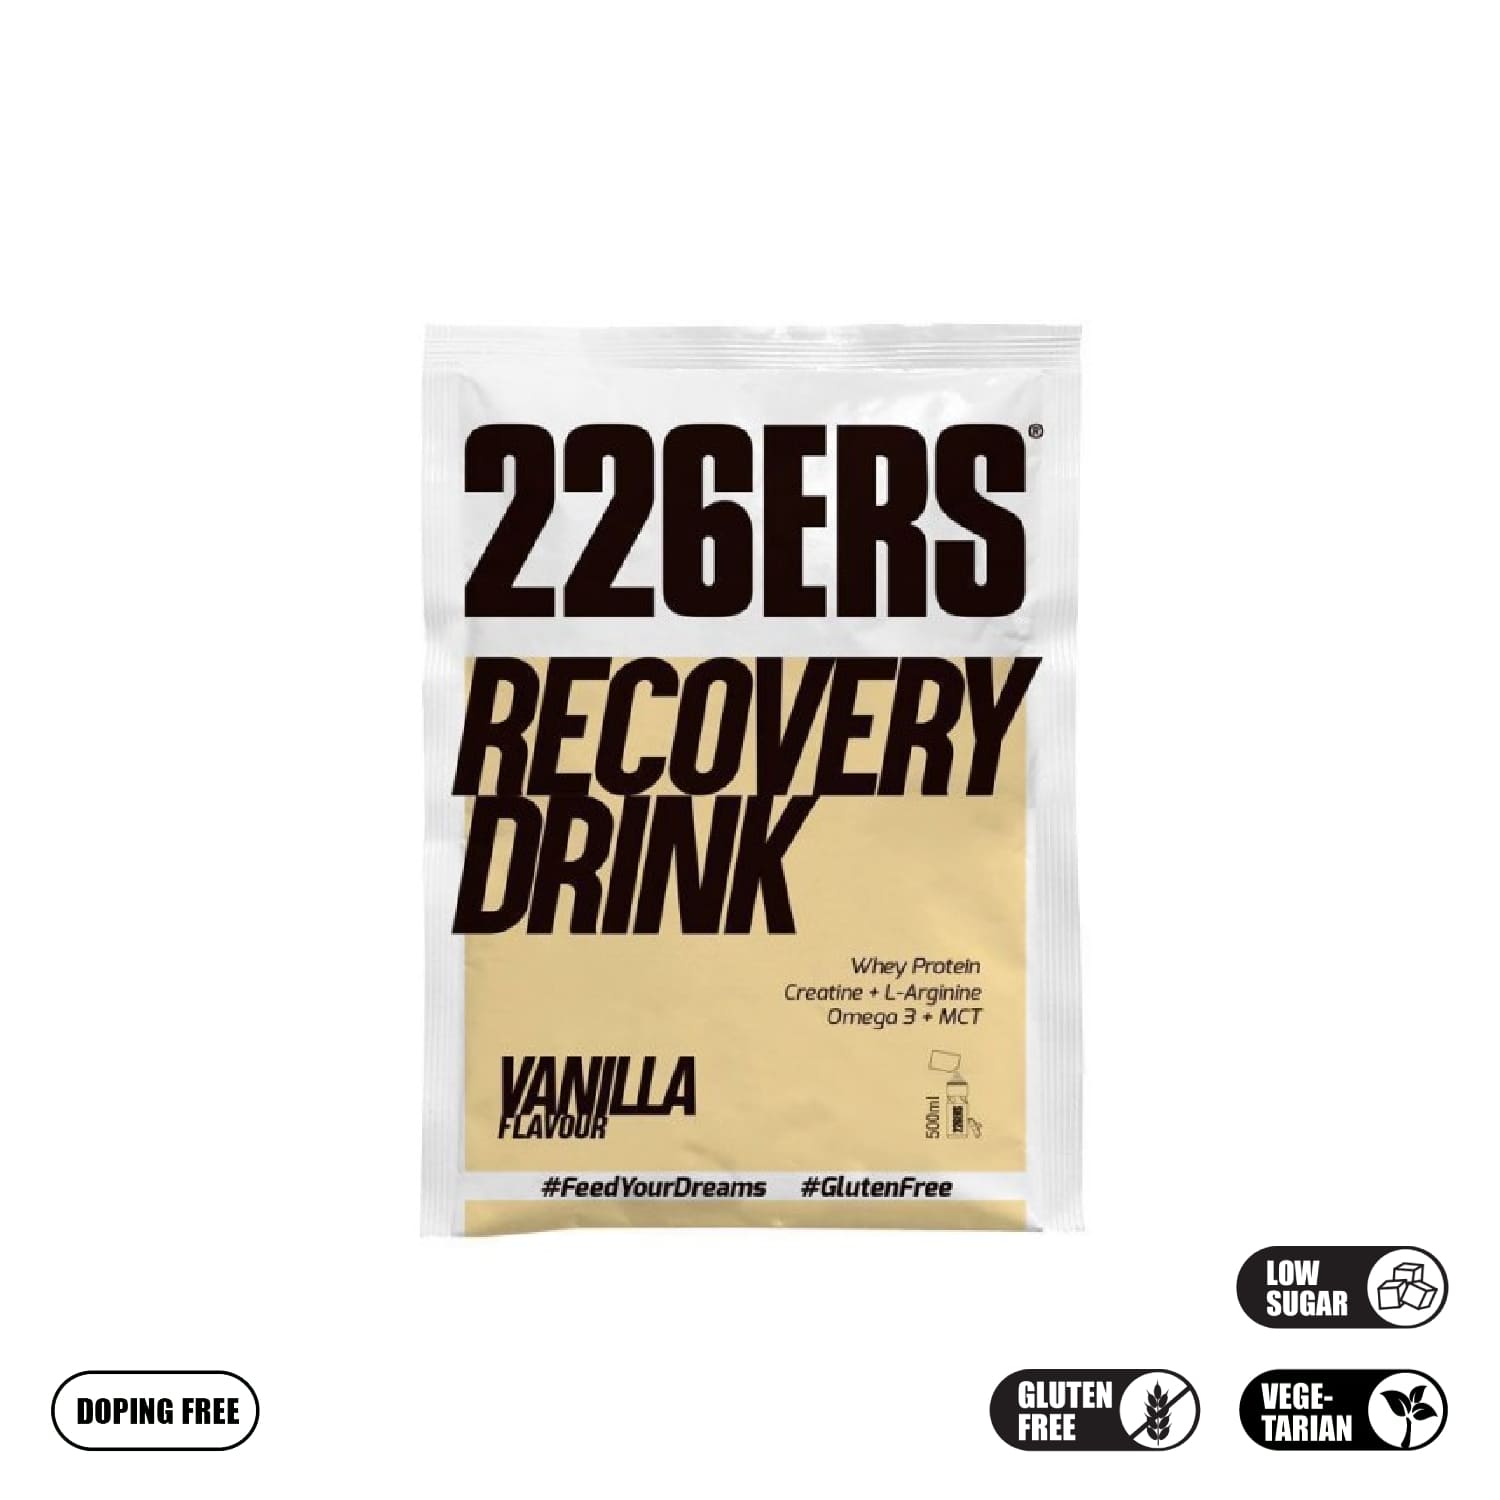 226ers_recovery drink_strawberry